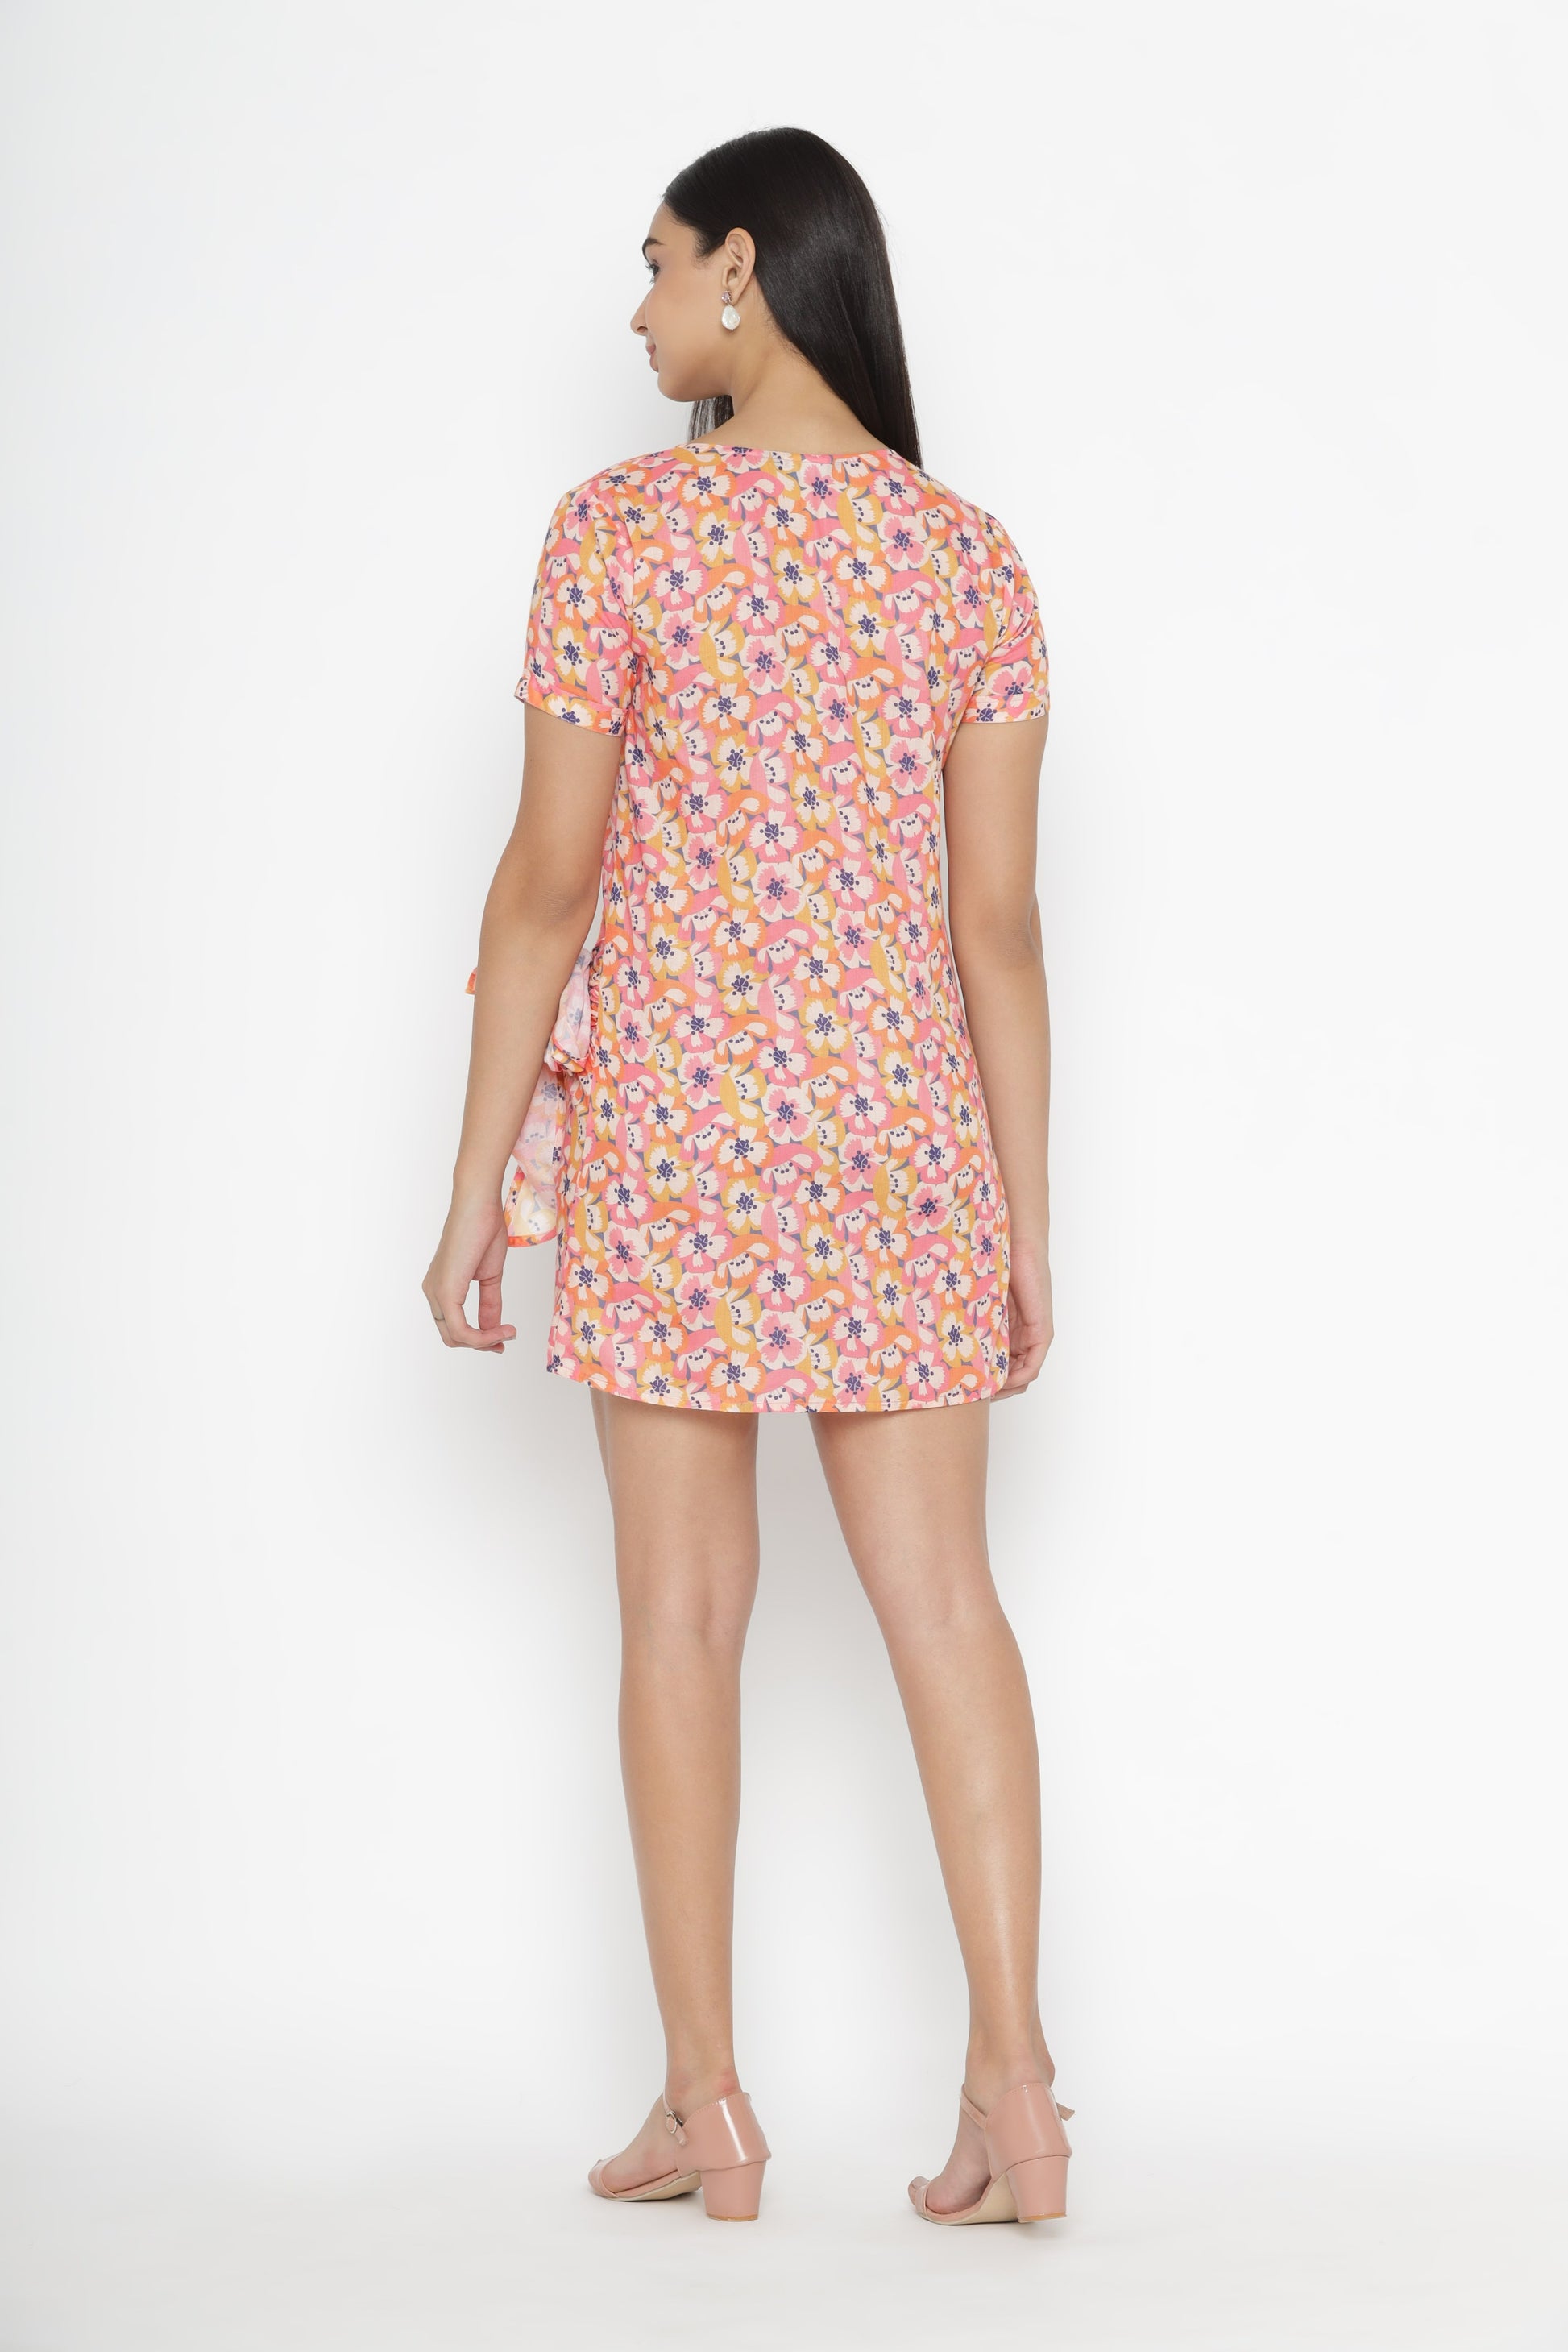 Floral Printed Pink- Yellow Rob Style Short Dress Gives Simple And Beautiful  Look | OCTICS |